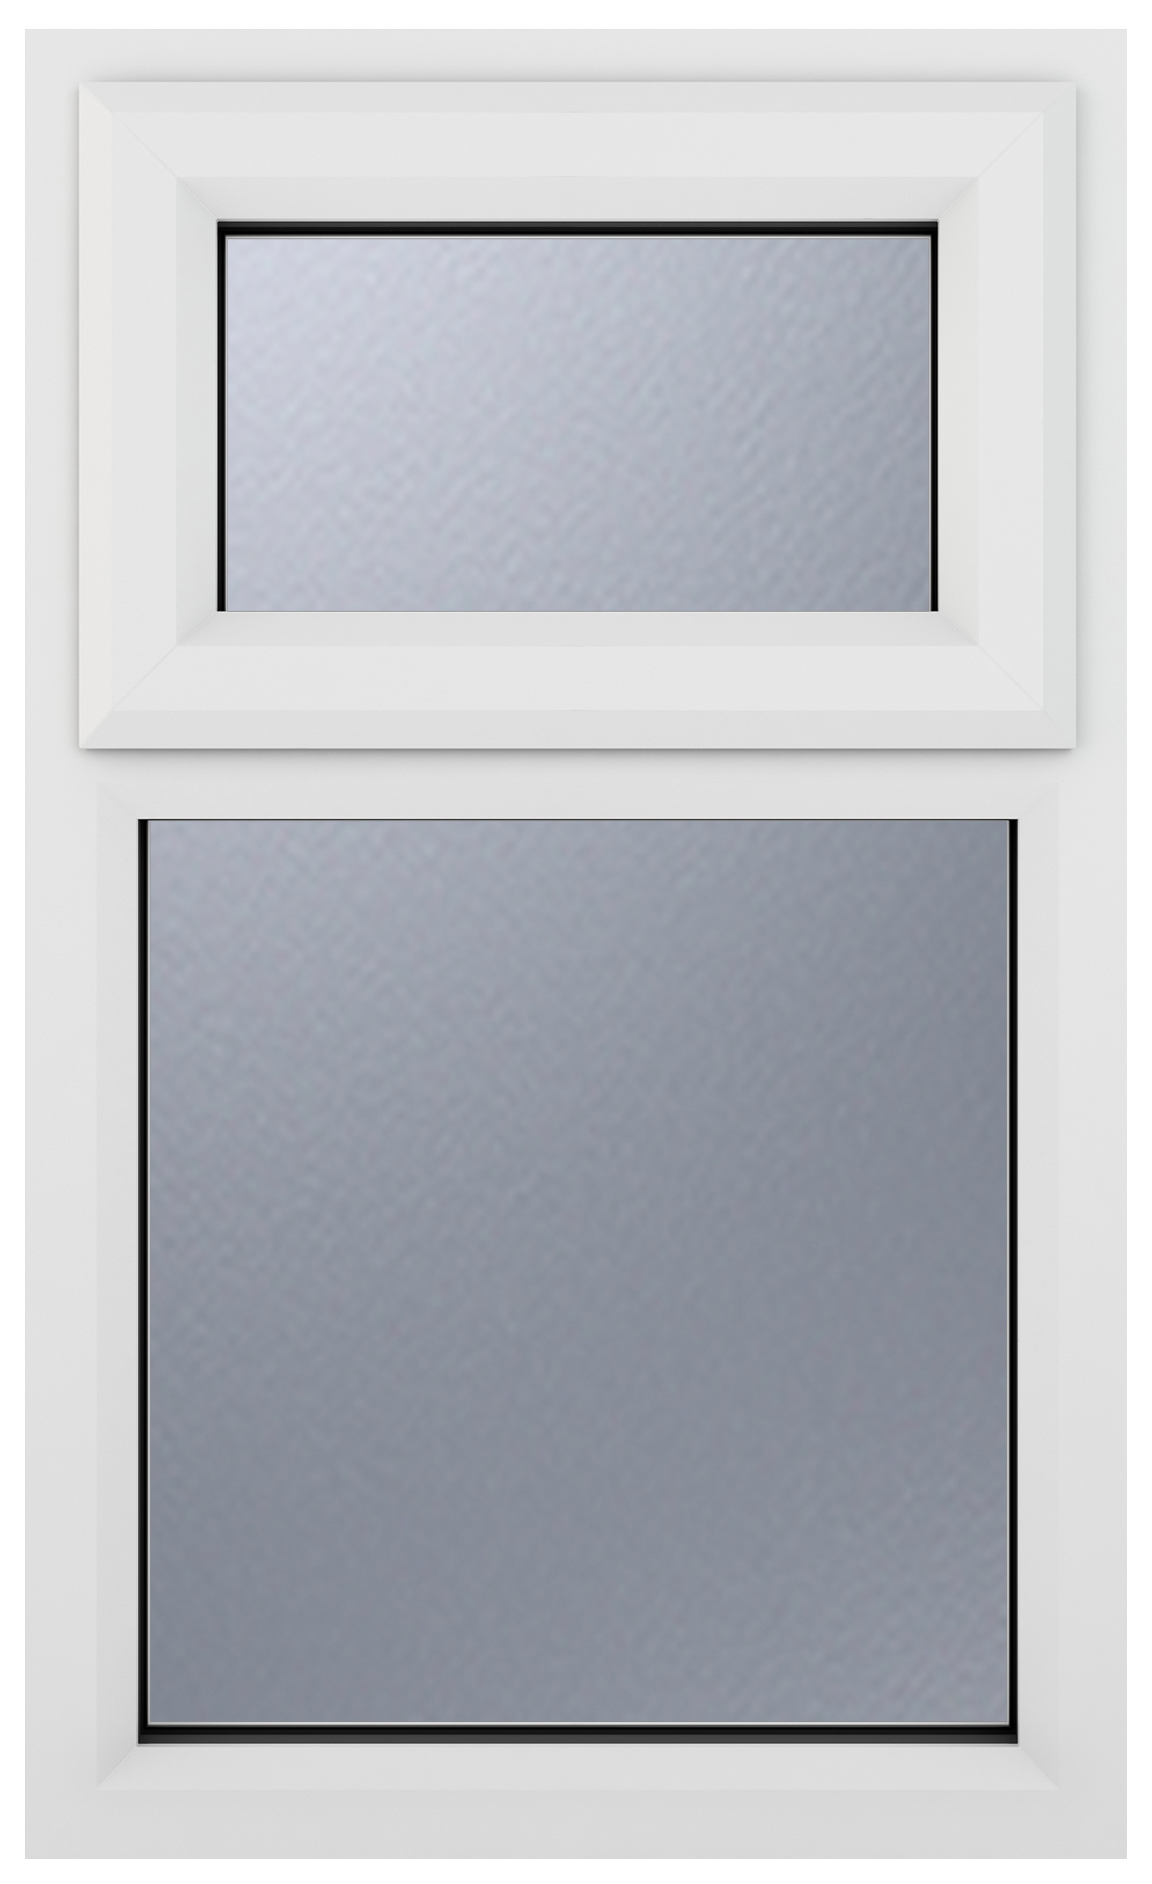 Crystal uPVC White Top Hung Opener Obscure Double Glazed Fixed Light Window - 610 x 965mm